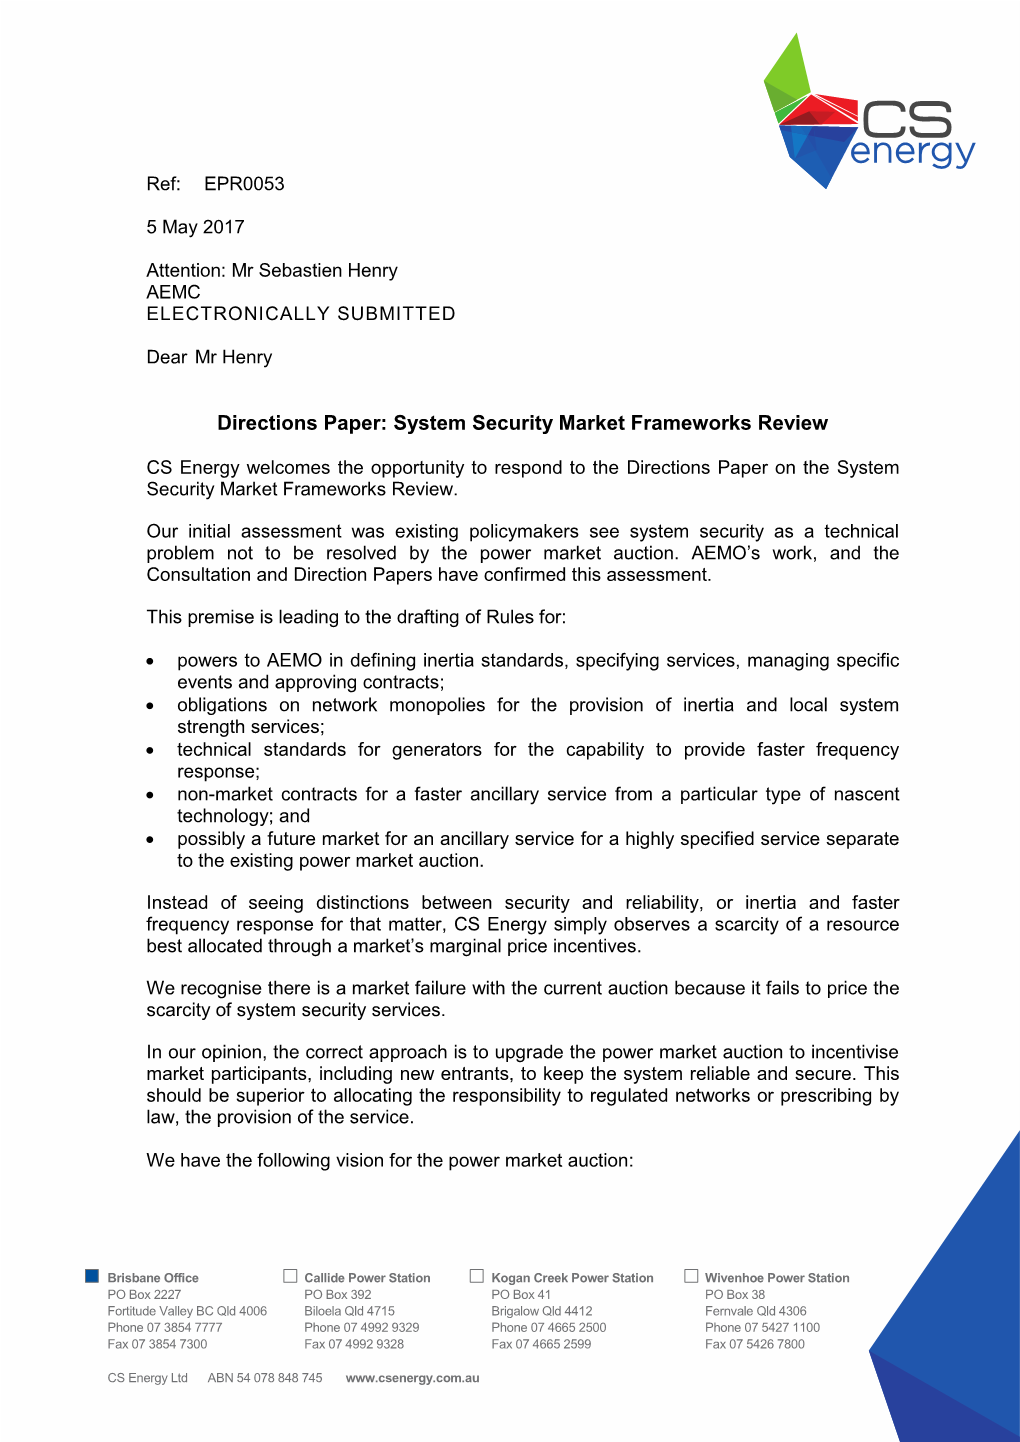 CS Energy Welcomes the Opportunity to Respond to the Directions Paper on the System Security Market Frameworks Review